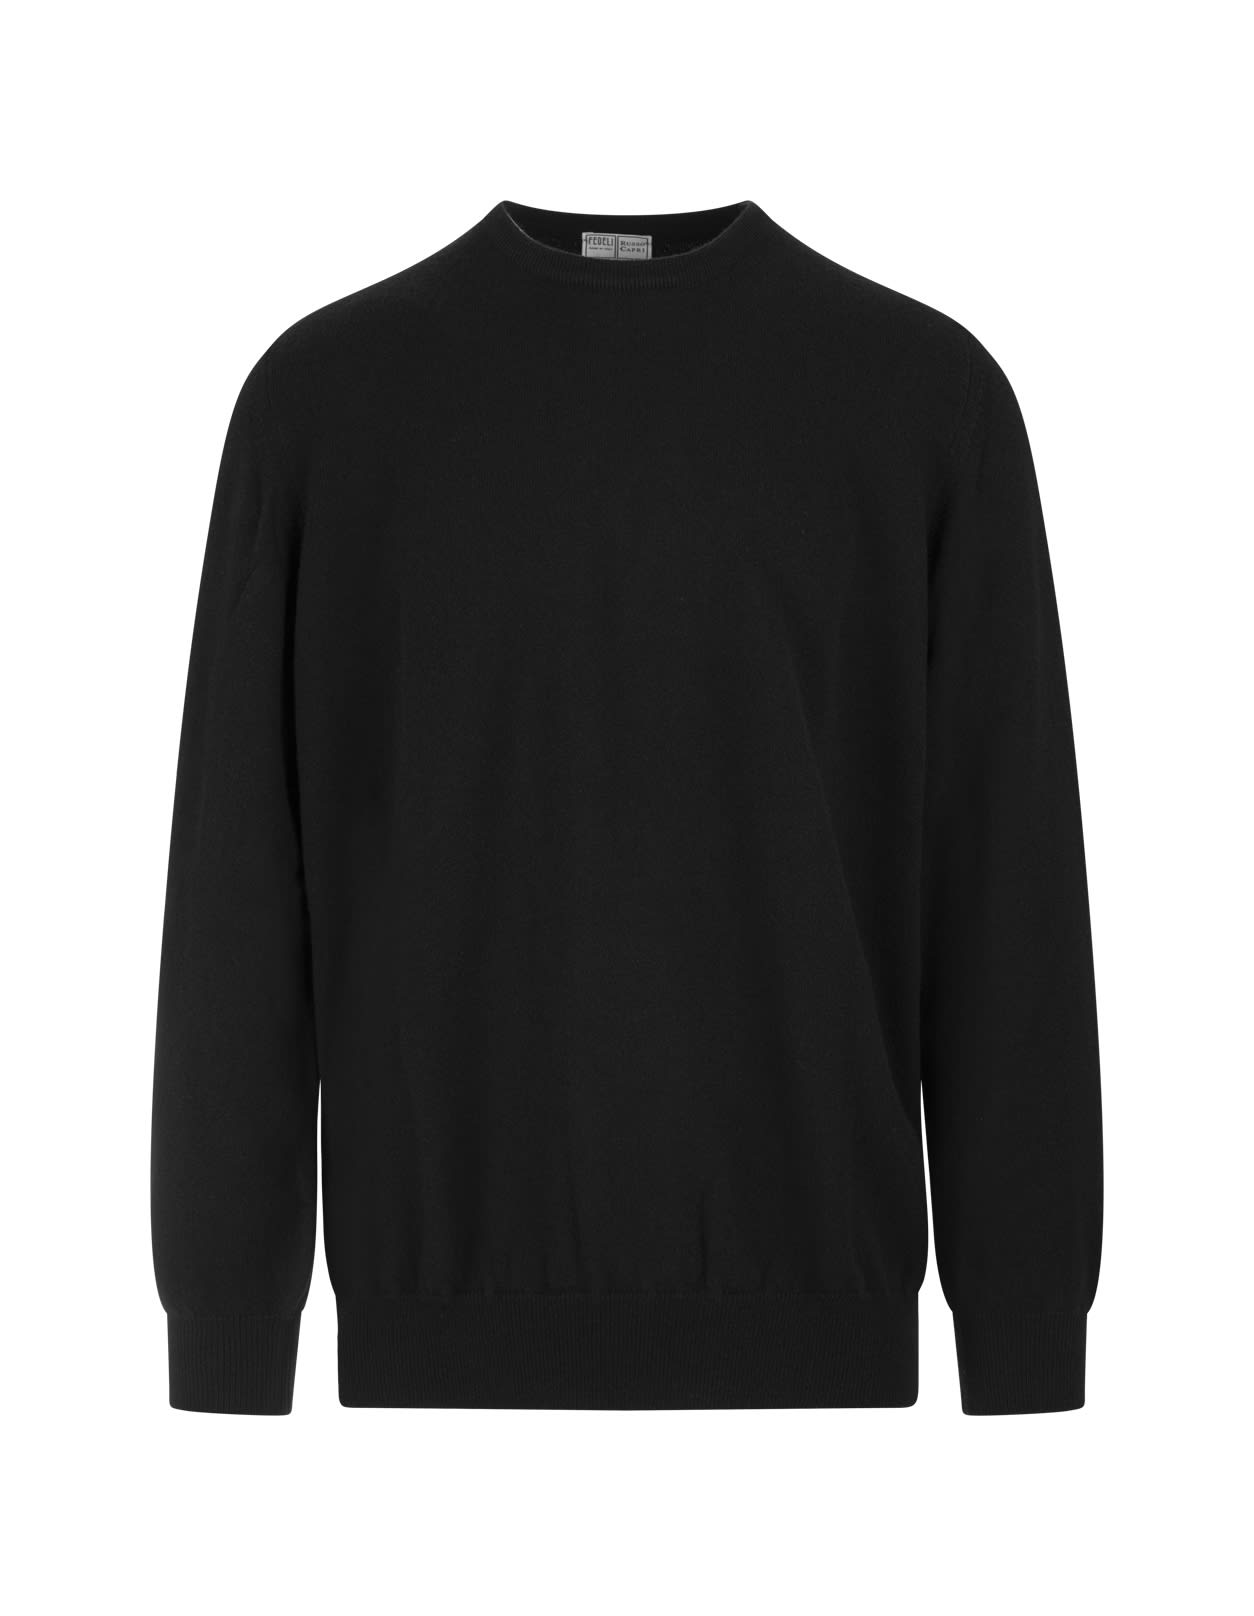 FEDELI MAN BLACK CASHMERE PULLOVER WITH ROUND-NECK